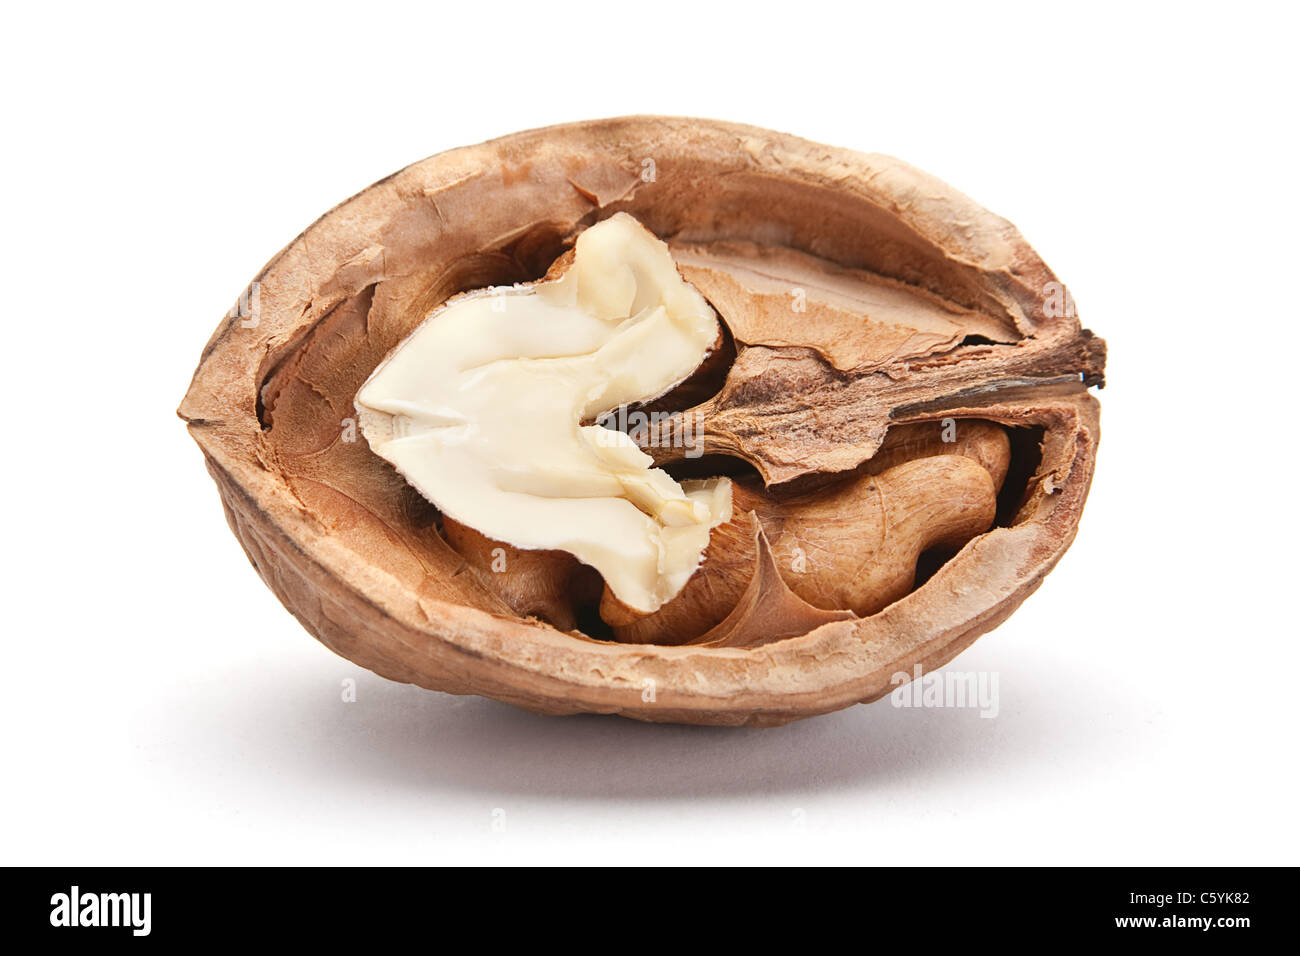 Walnut brown nut closeup isolated on white Stock Photo